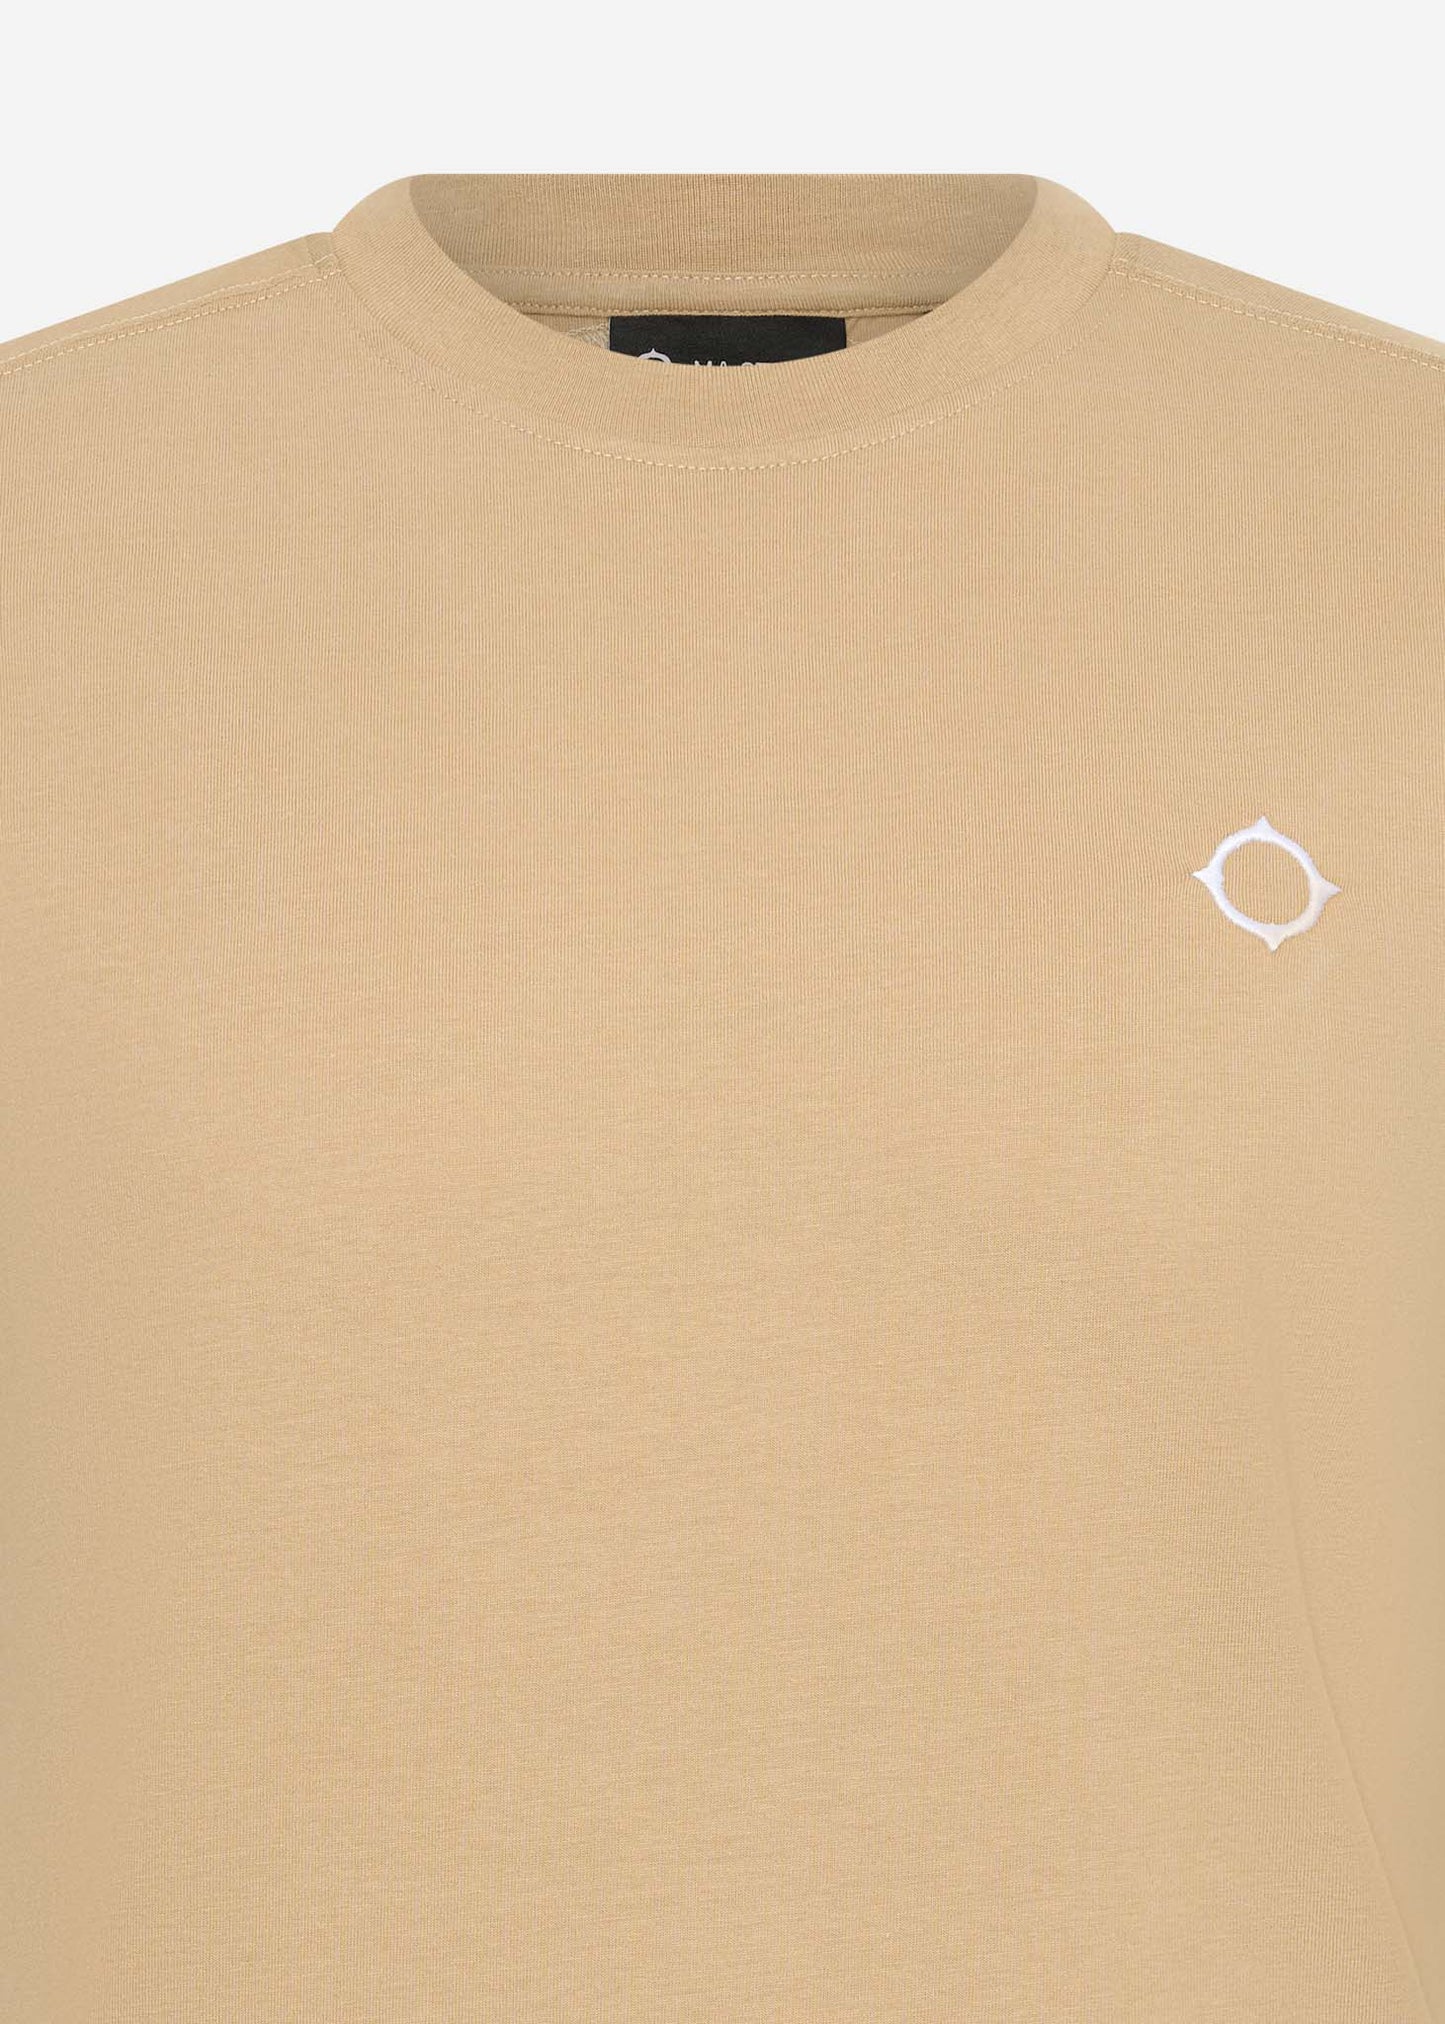 SS icon tee - sand